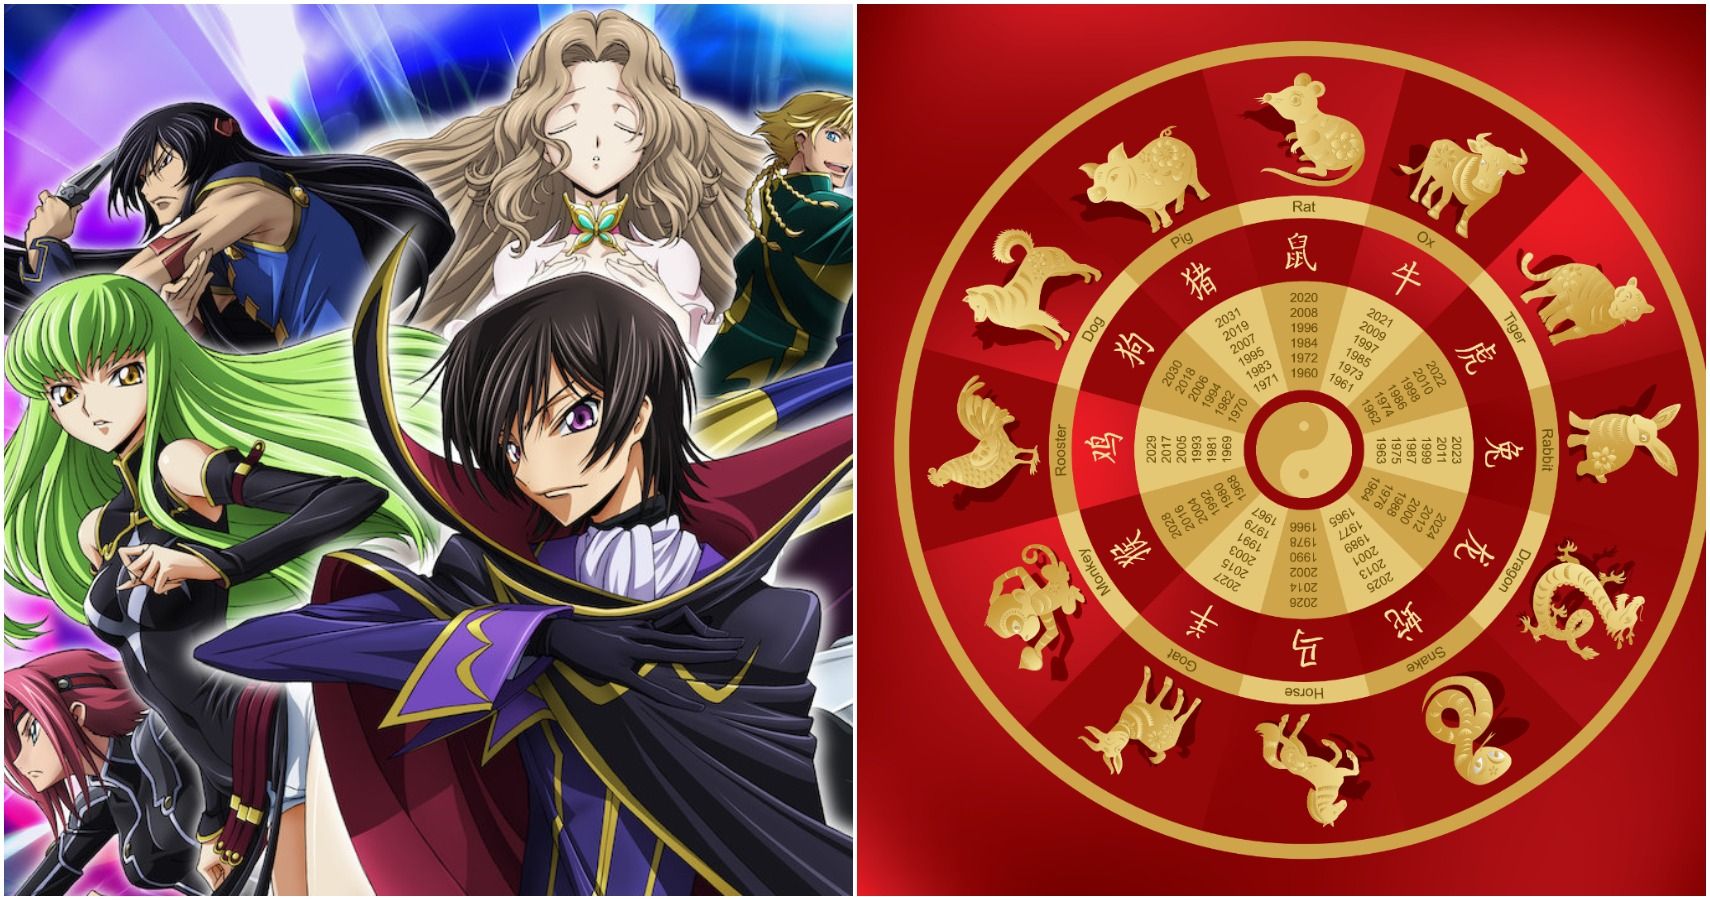 Featured image of post Code Geass Ymmv Hangyaku no lelouch anime images wallpapers hd wallpapers android iphone wallpapers fanart cosplay pictures screenshots facebook covers and many more in